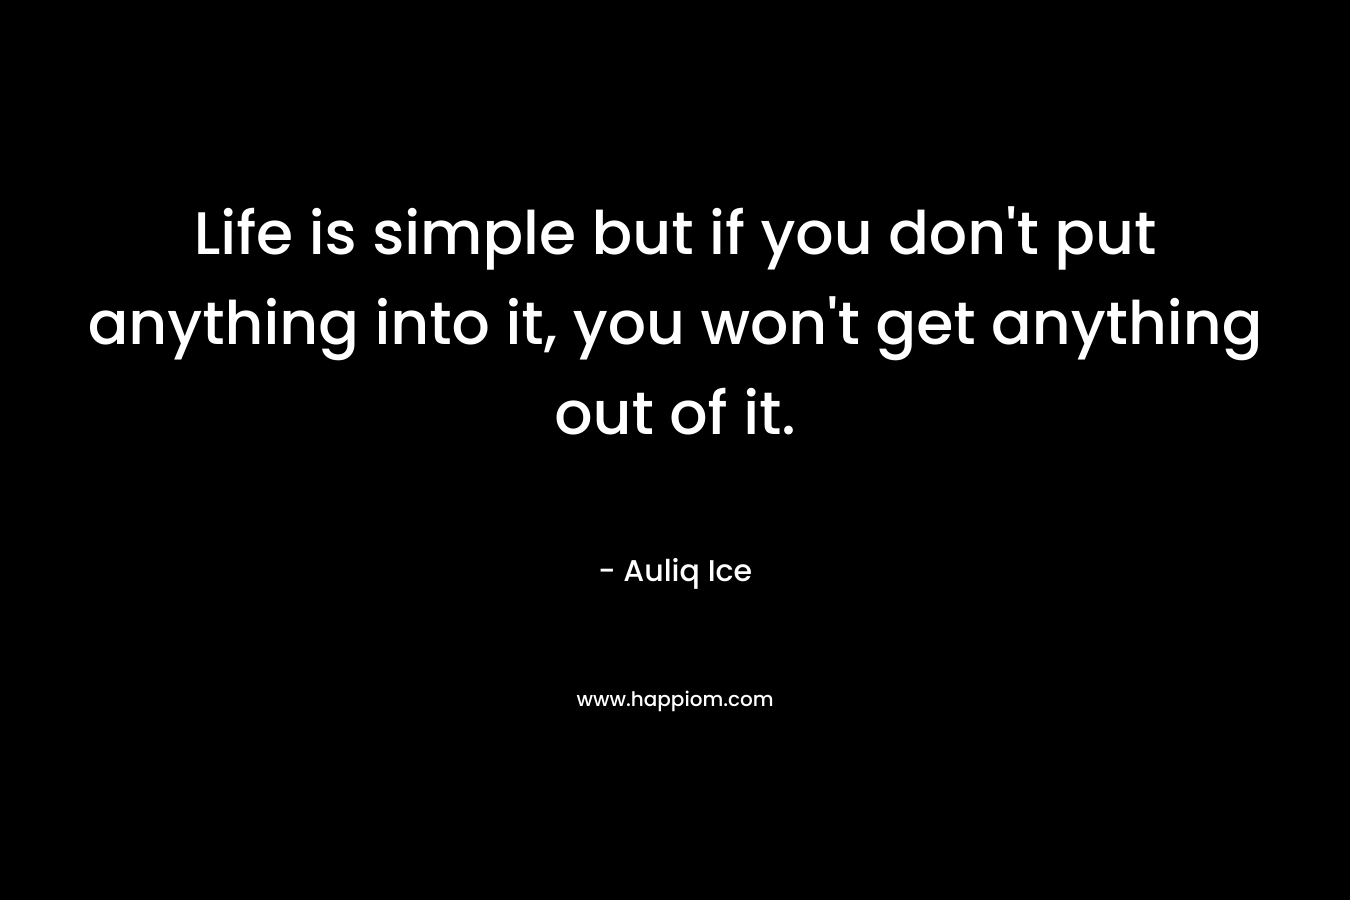 Life is simple but if you don't put anything into it, you won't get anything out of it.